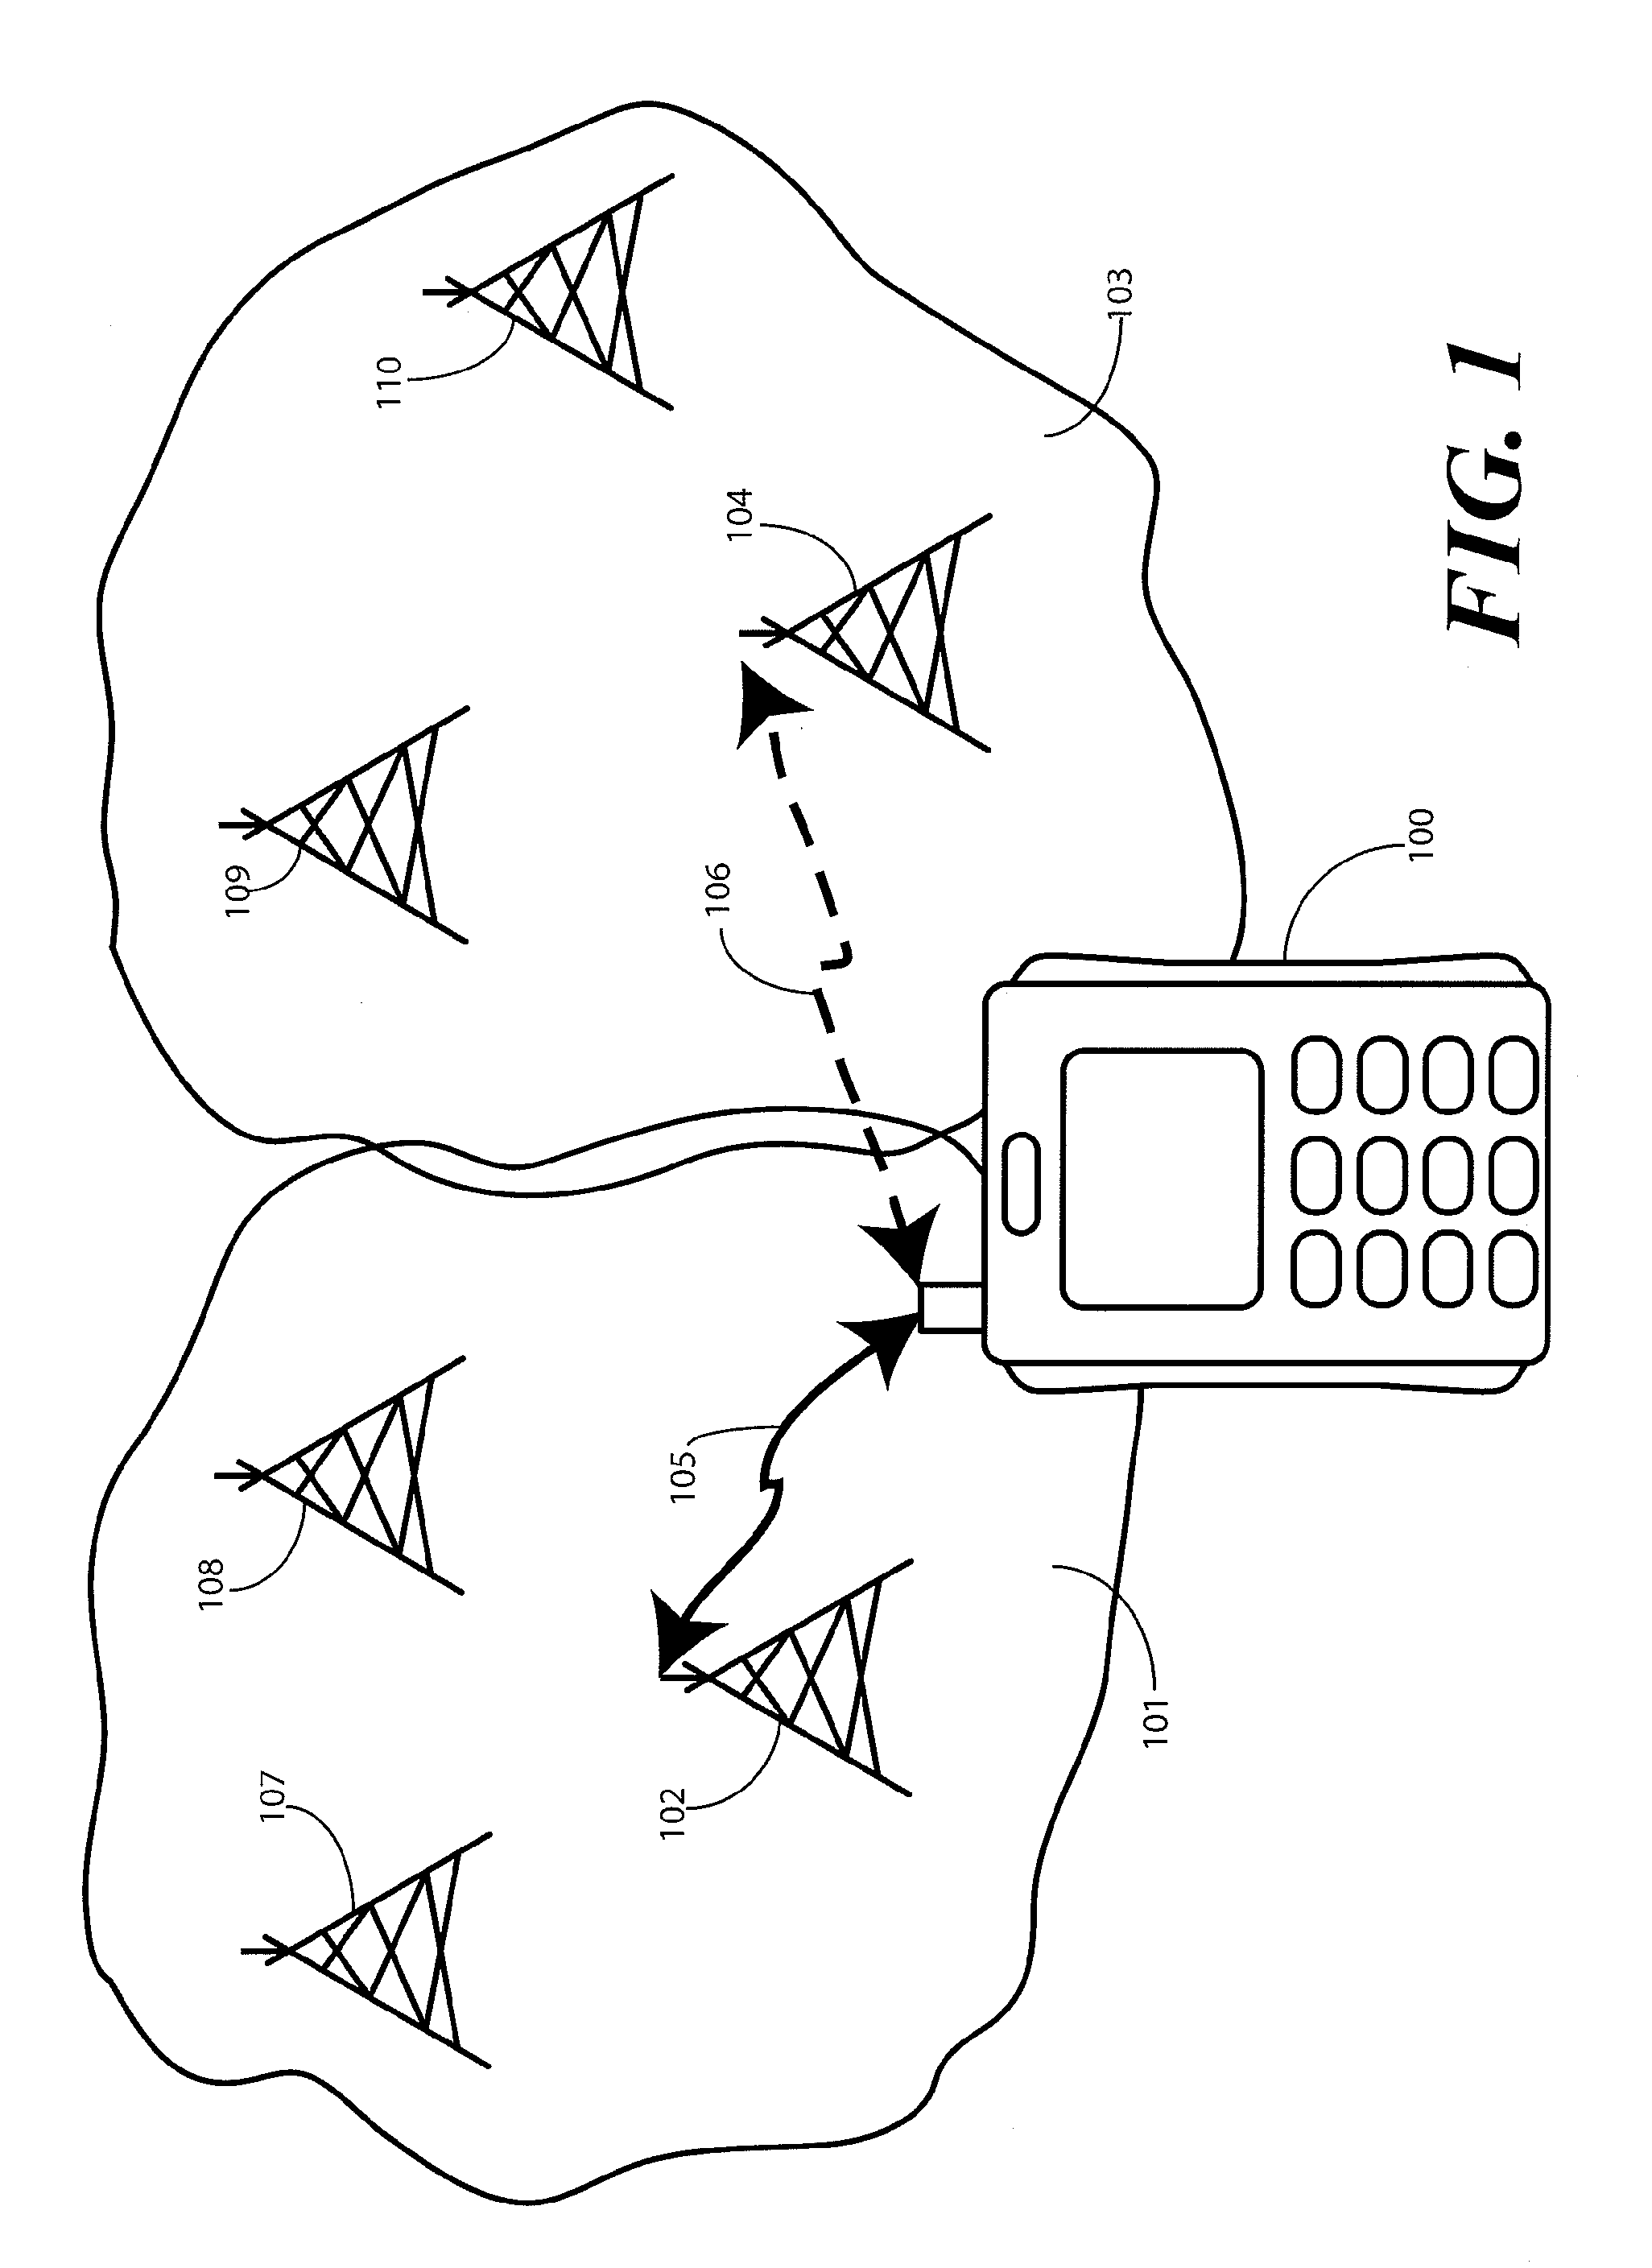 Method and Apparatus for Automatic Frequency Correction in a Multimode Device